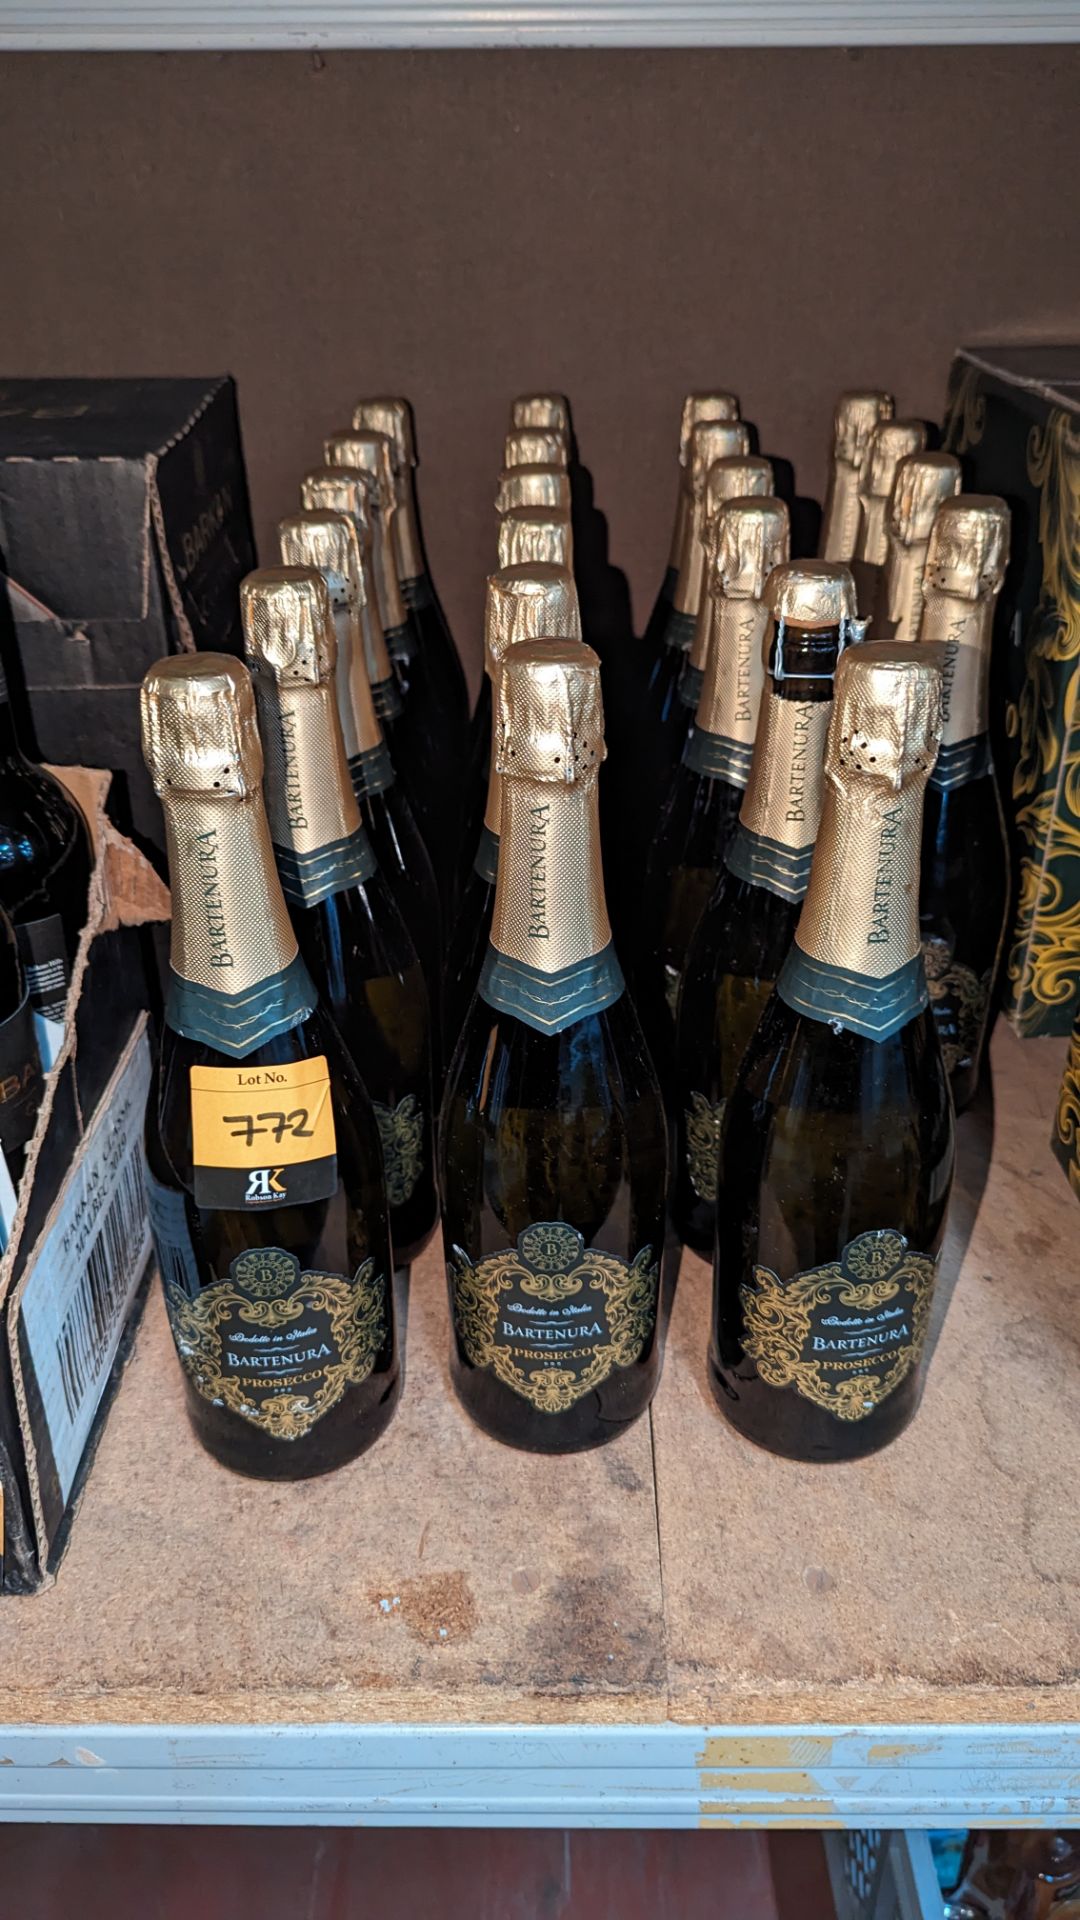 22 bottles of Bartenura Brut Prosecco Italian white sparkling wine sold under AWRS number XQAW000001